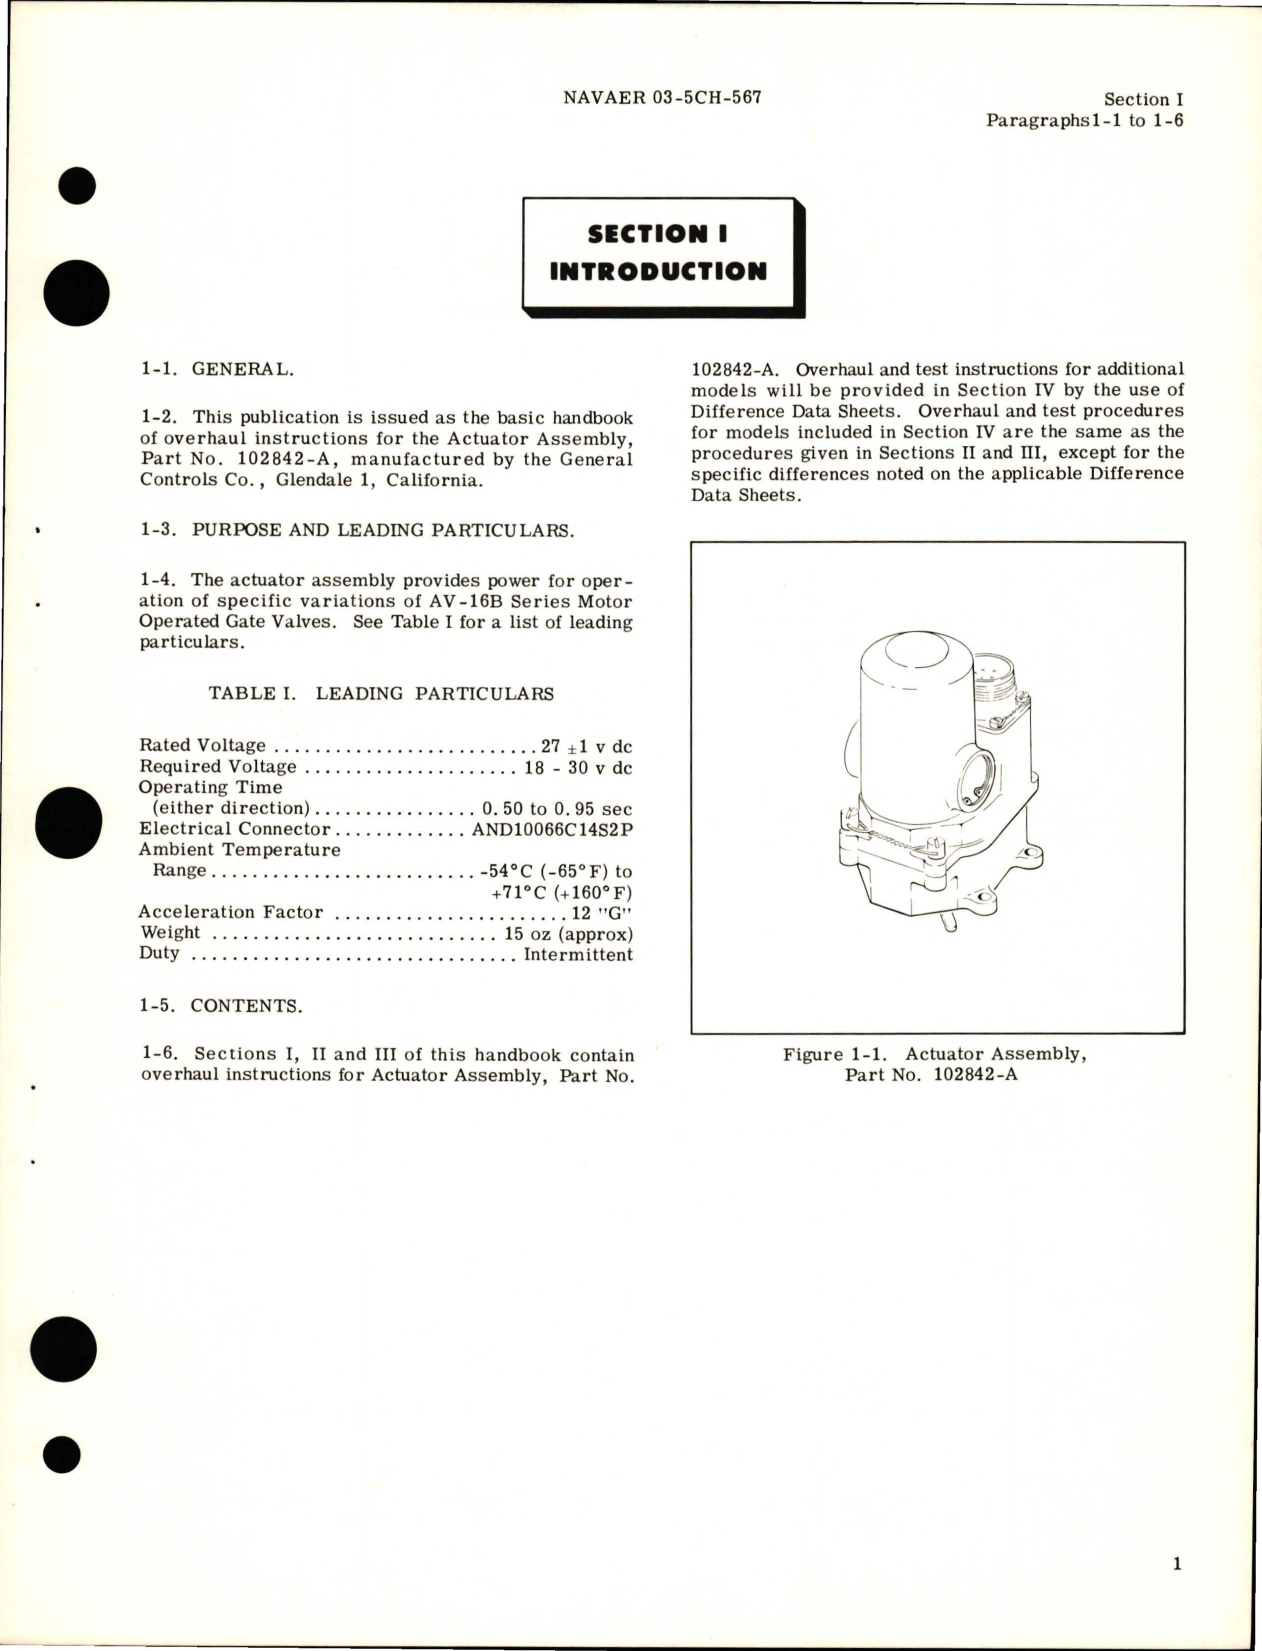 Sample page 5 from AirCorps Library document: Overhaul Instructions for Actuator Assembly - Part 102842-A and Similar Parts